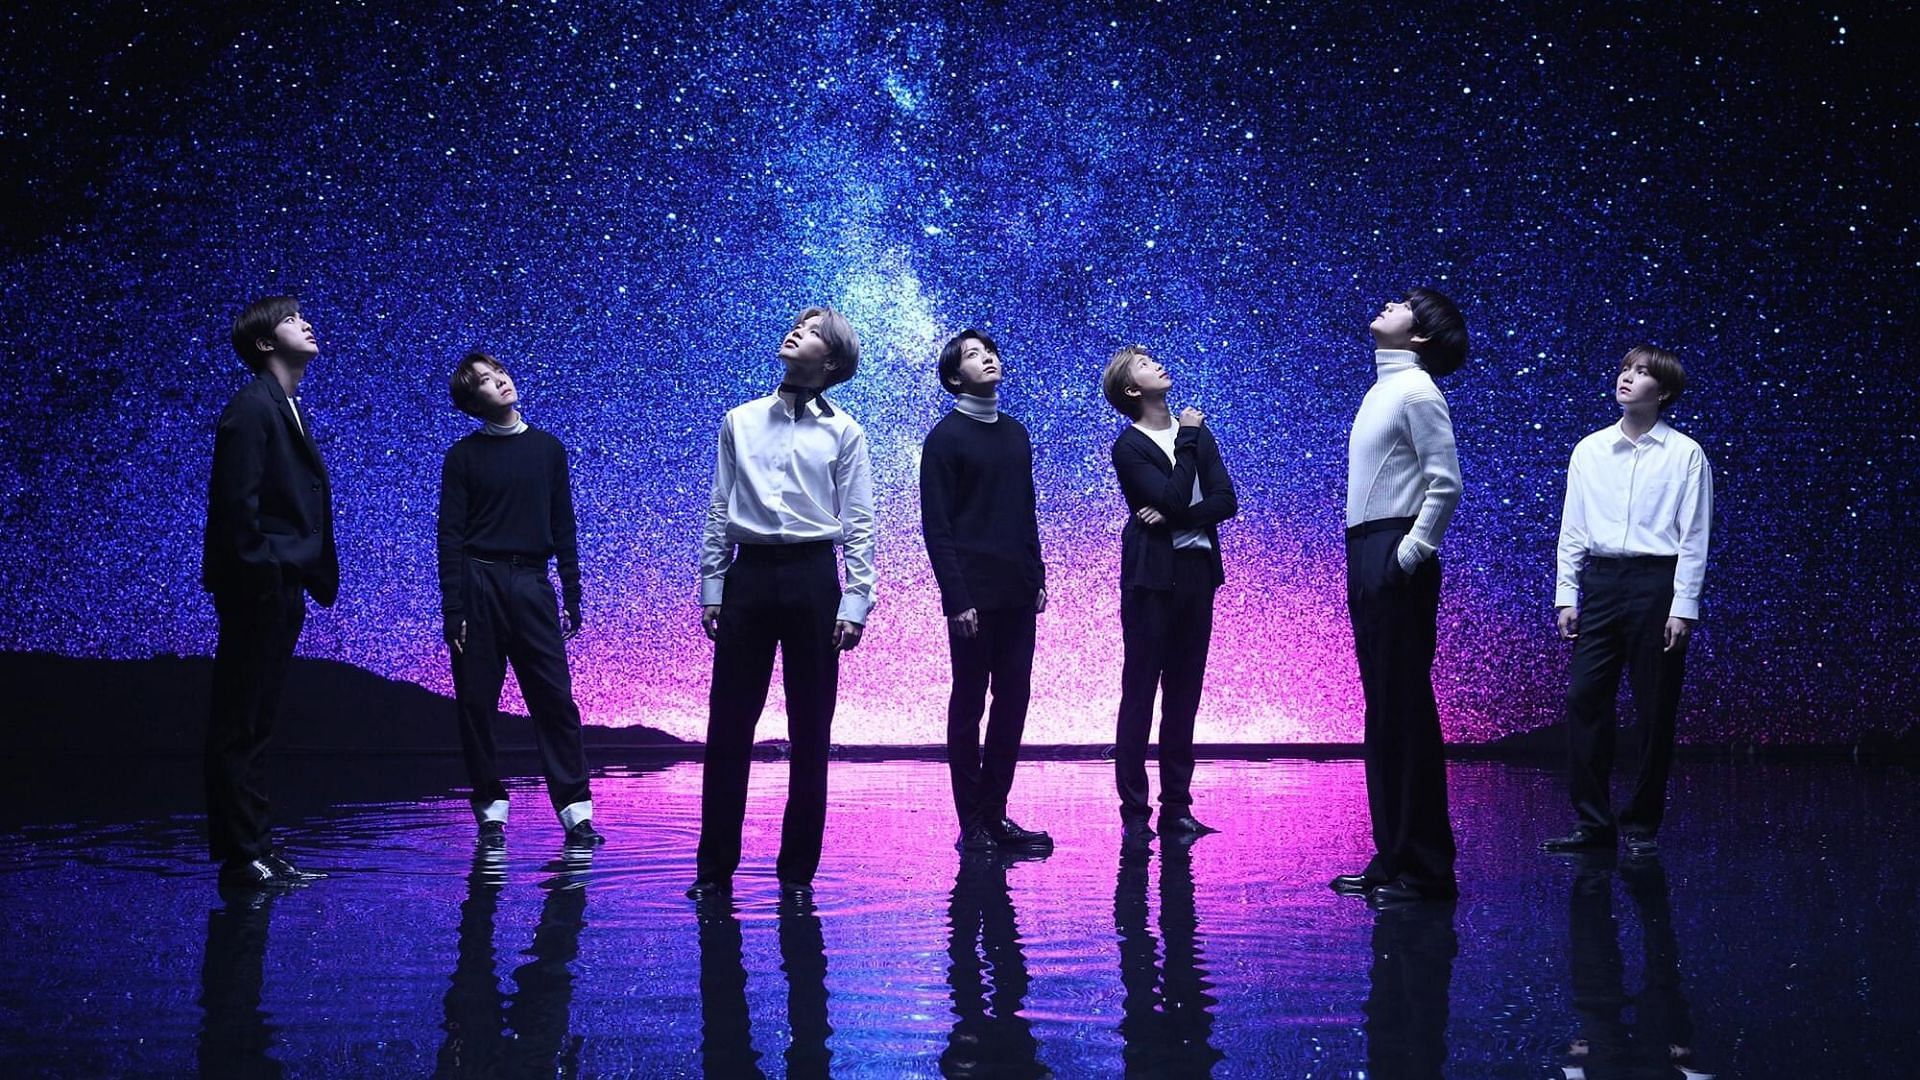 There are many BTS songs that use metaphors about the universe. (Image via Facebook/ bangtan.official)